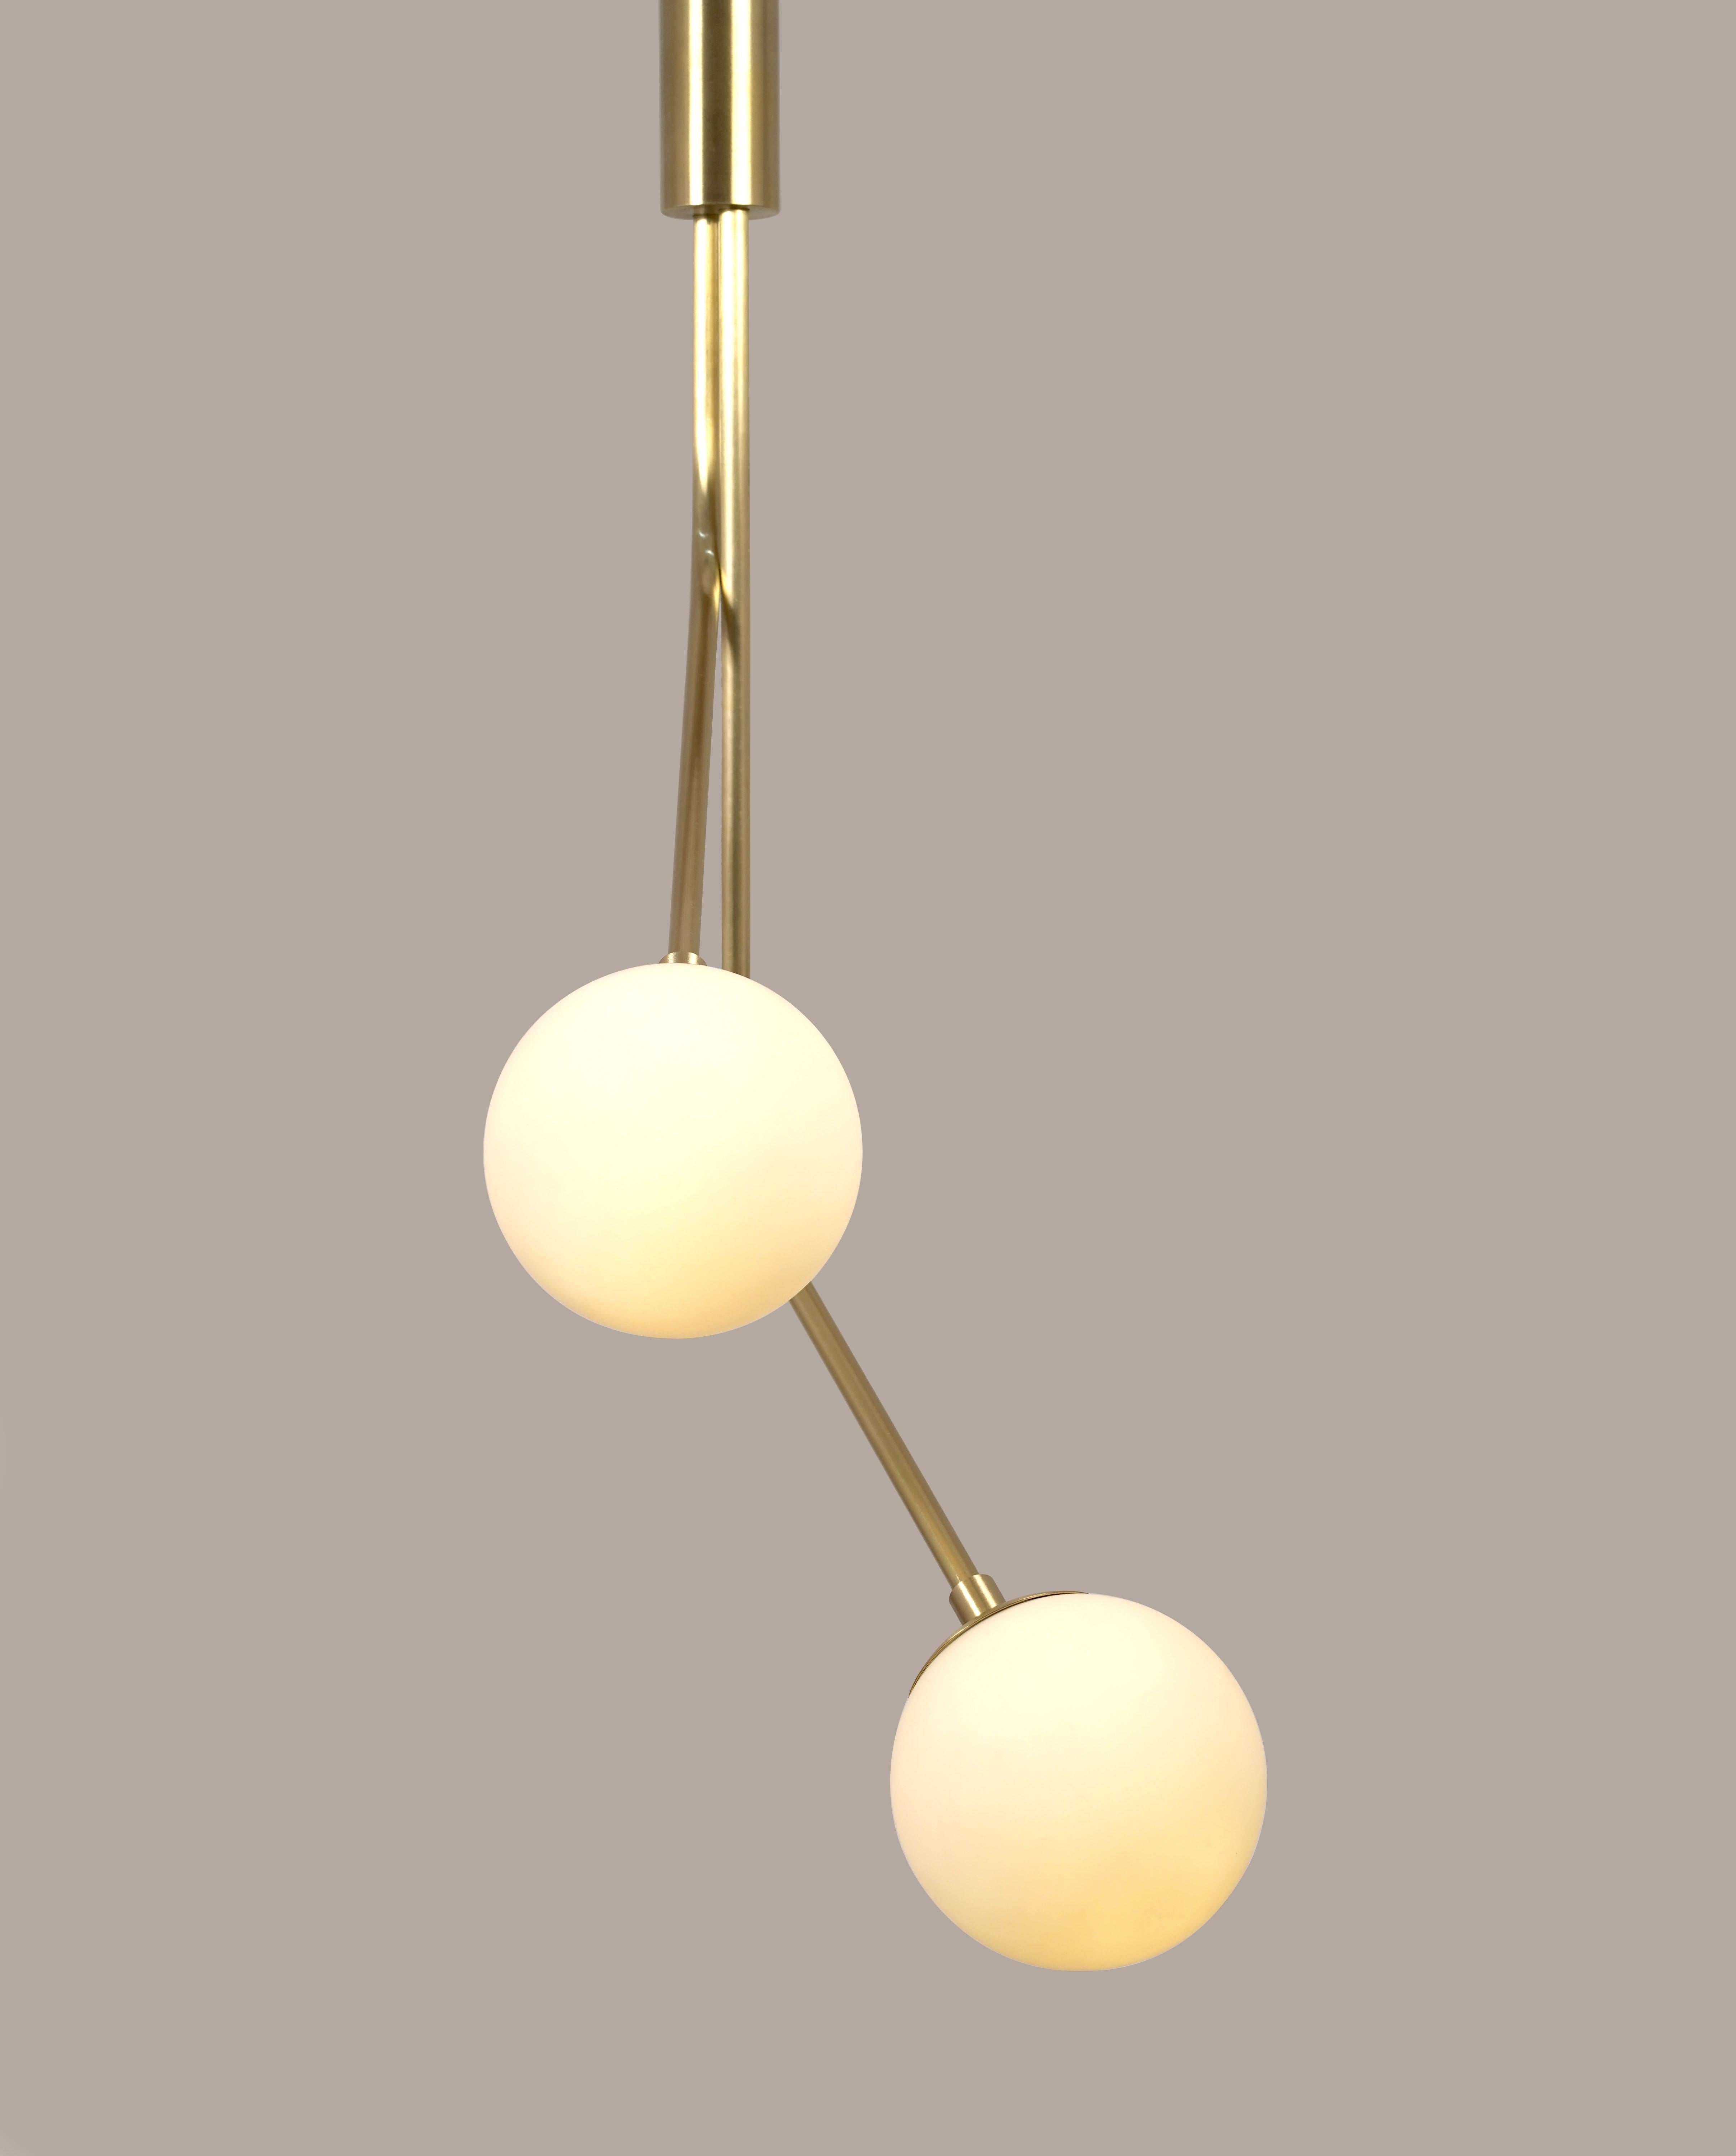 Rhythm 2 Glass Globe Pendant Lamp by Lamp Shaper
Dimensions: D 86.5 x W 86.5 x H 114 cm.
Materials: Brass and glass.

Different finishes available: raw brass, aged brass, burnt brass and brushed brass Please contact us.

All our lamps can be wired